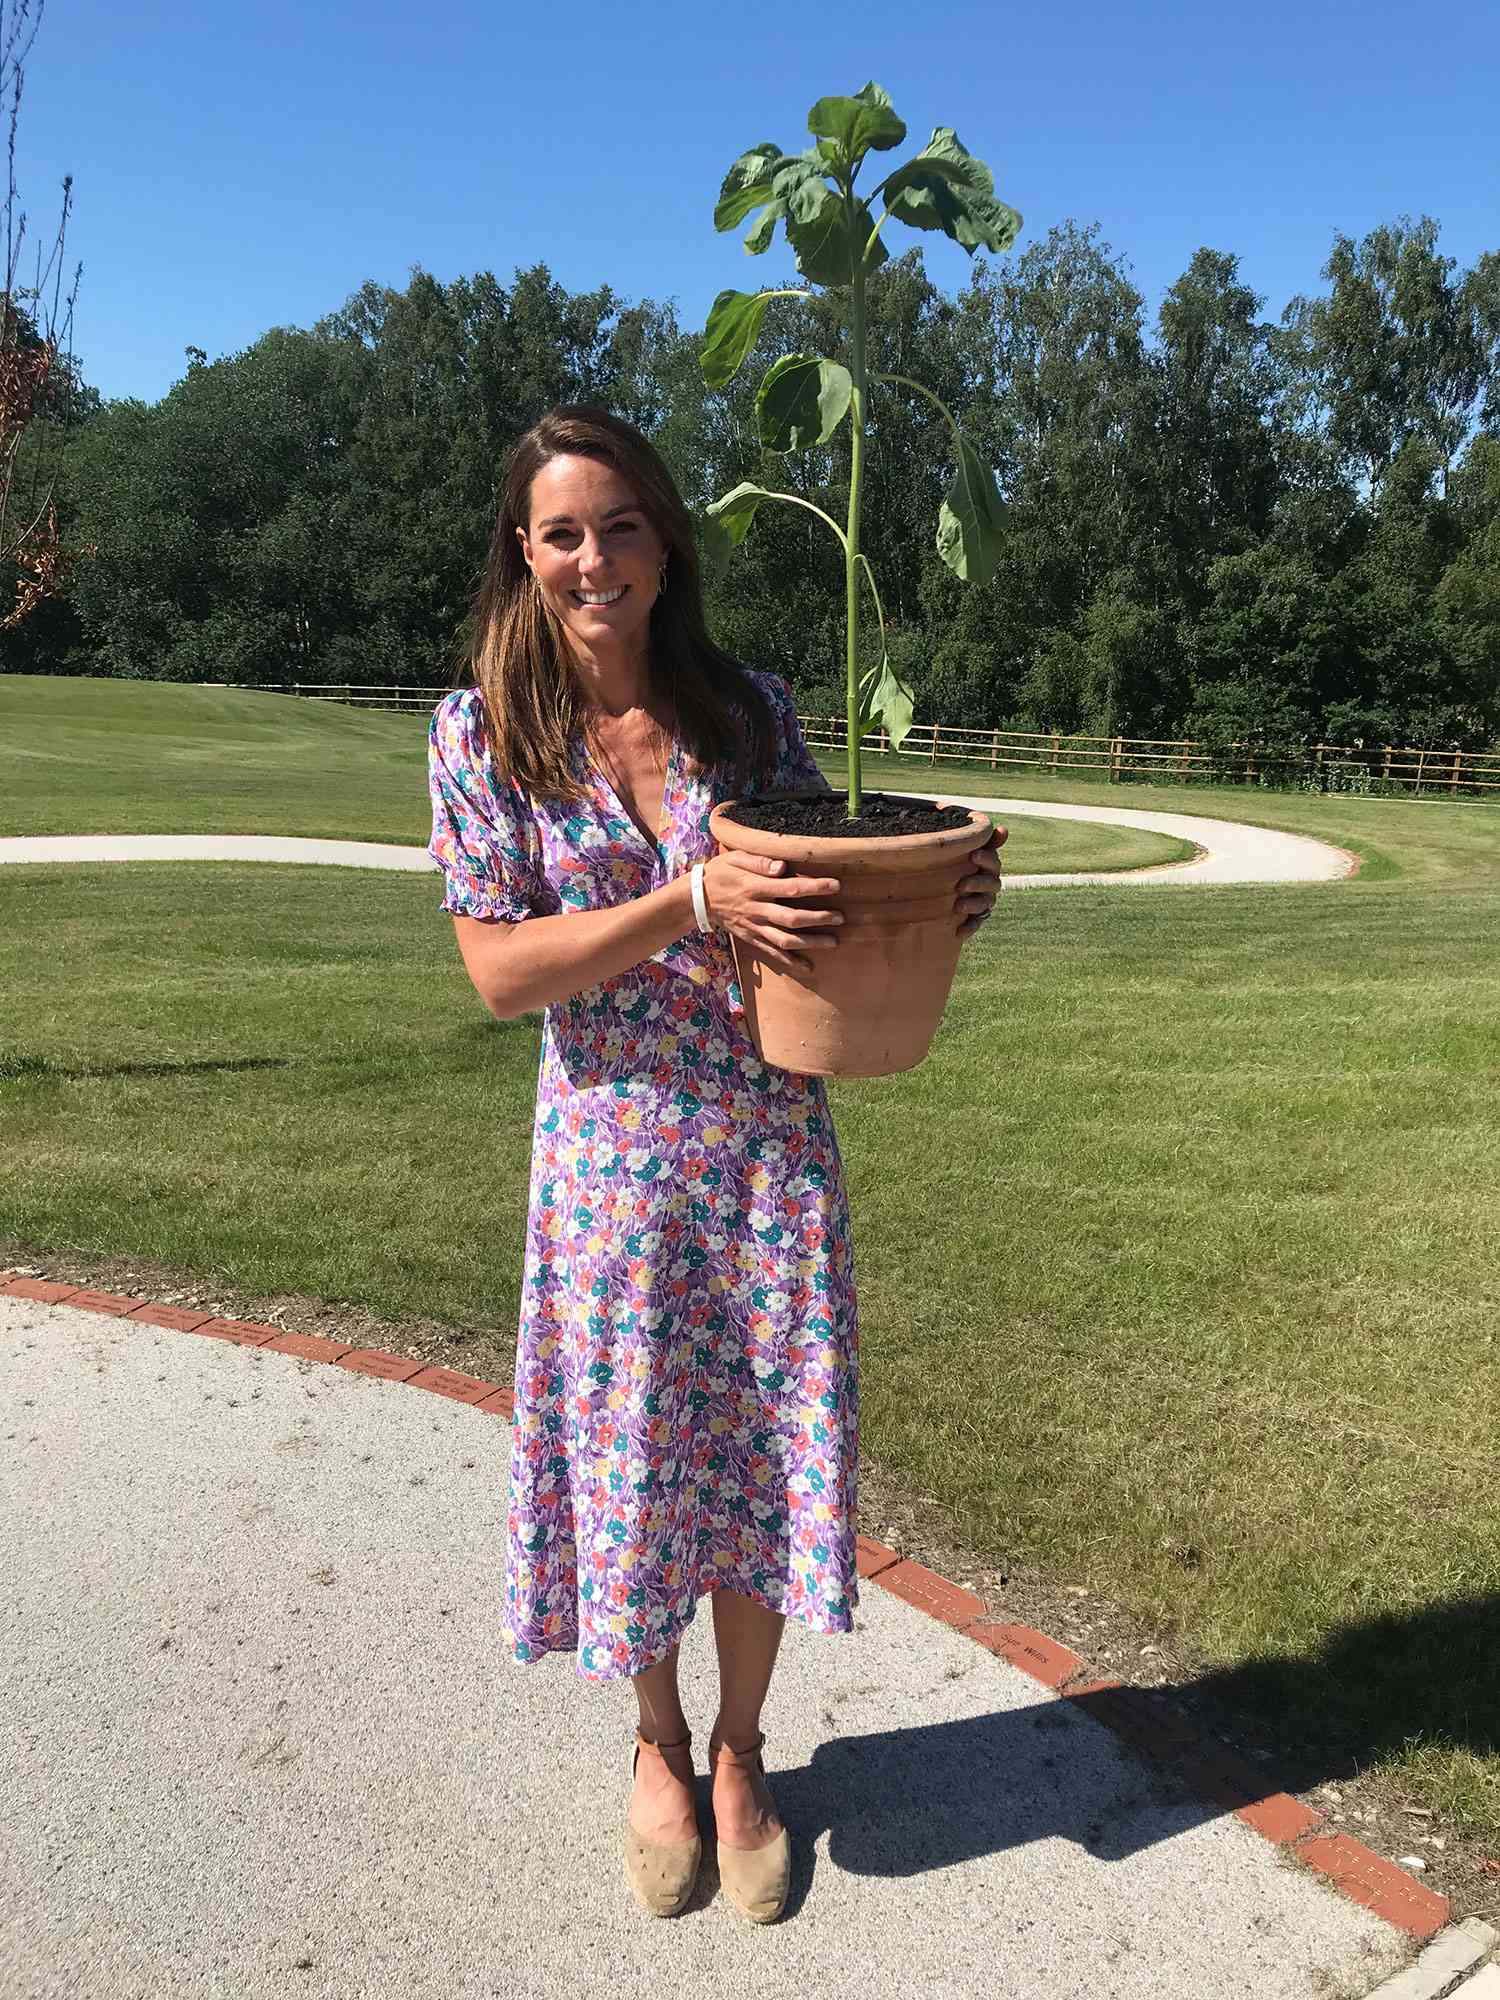 Kate Middleton Plants Sunflower in Memory of a Boy | PEOPLE.com